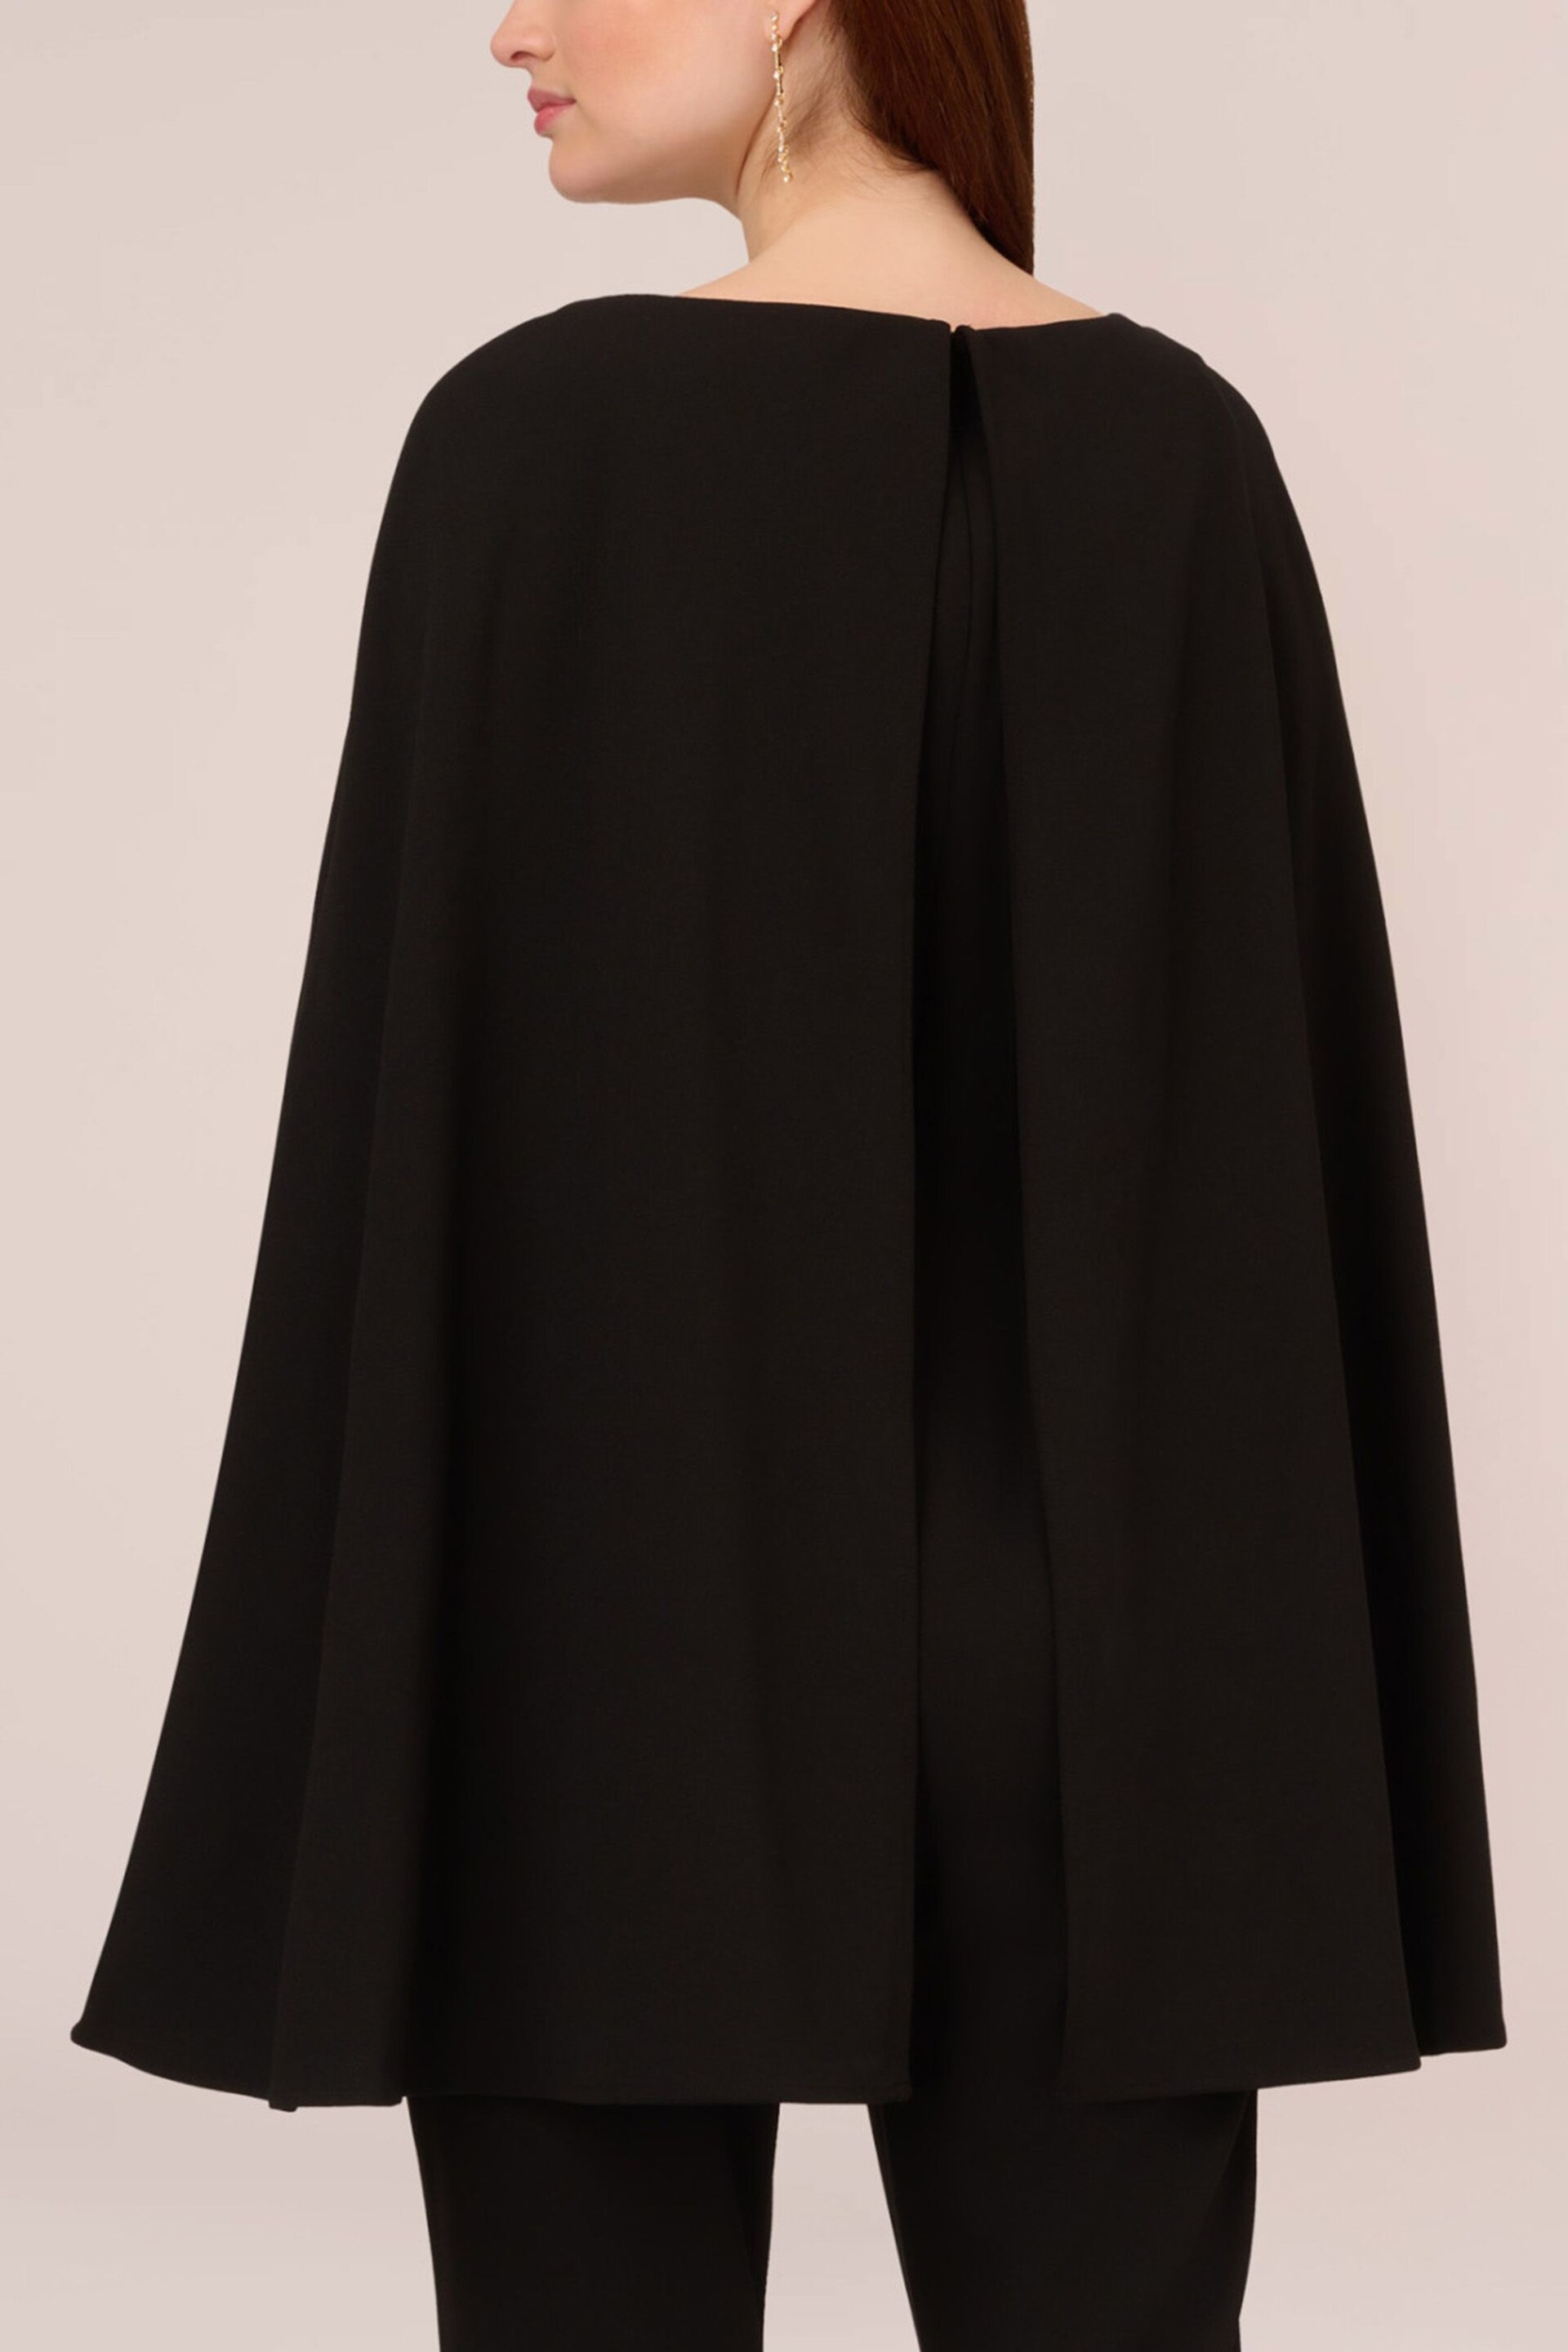 Adrianna Papell Knit Crepe Cape Jumpsuit - Image 5 of 6